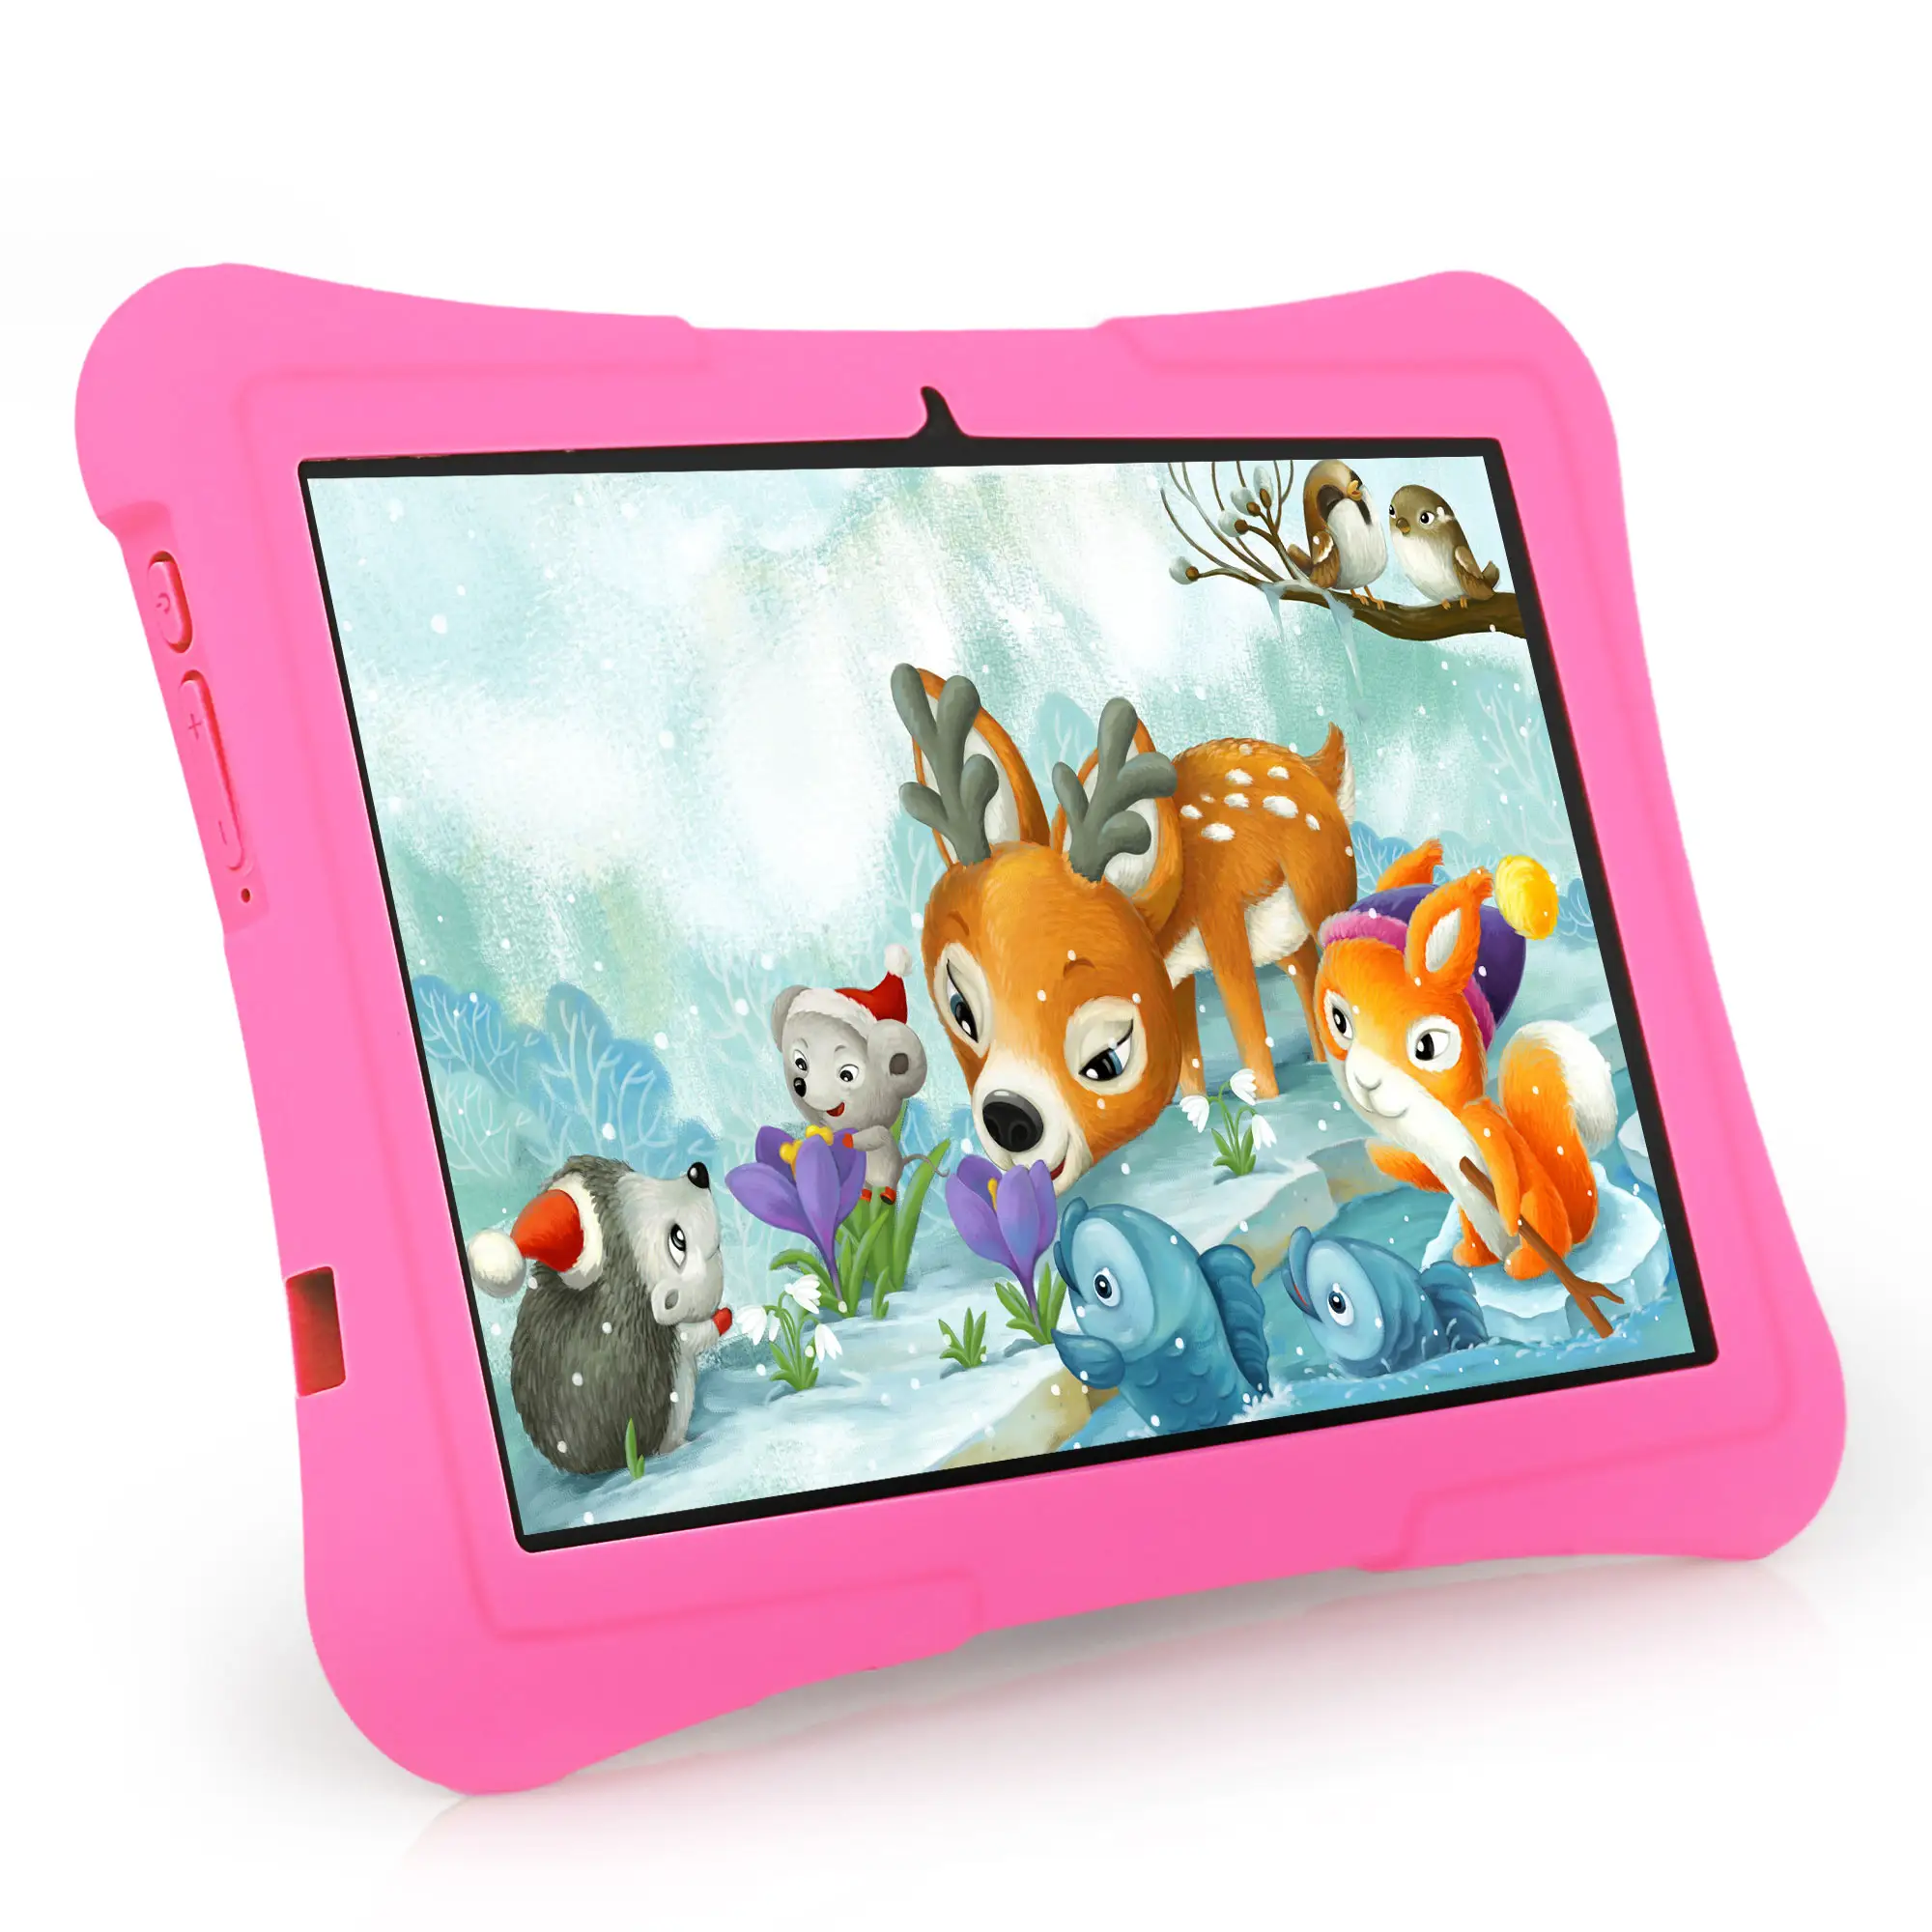 VeidooキッズタブレットPC10インチAndroidタブレットforKids 8GB 4 Expand Ram 128GB ROM wifi 6 Tablet with Shockproof Case